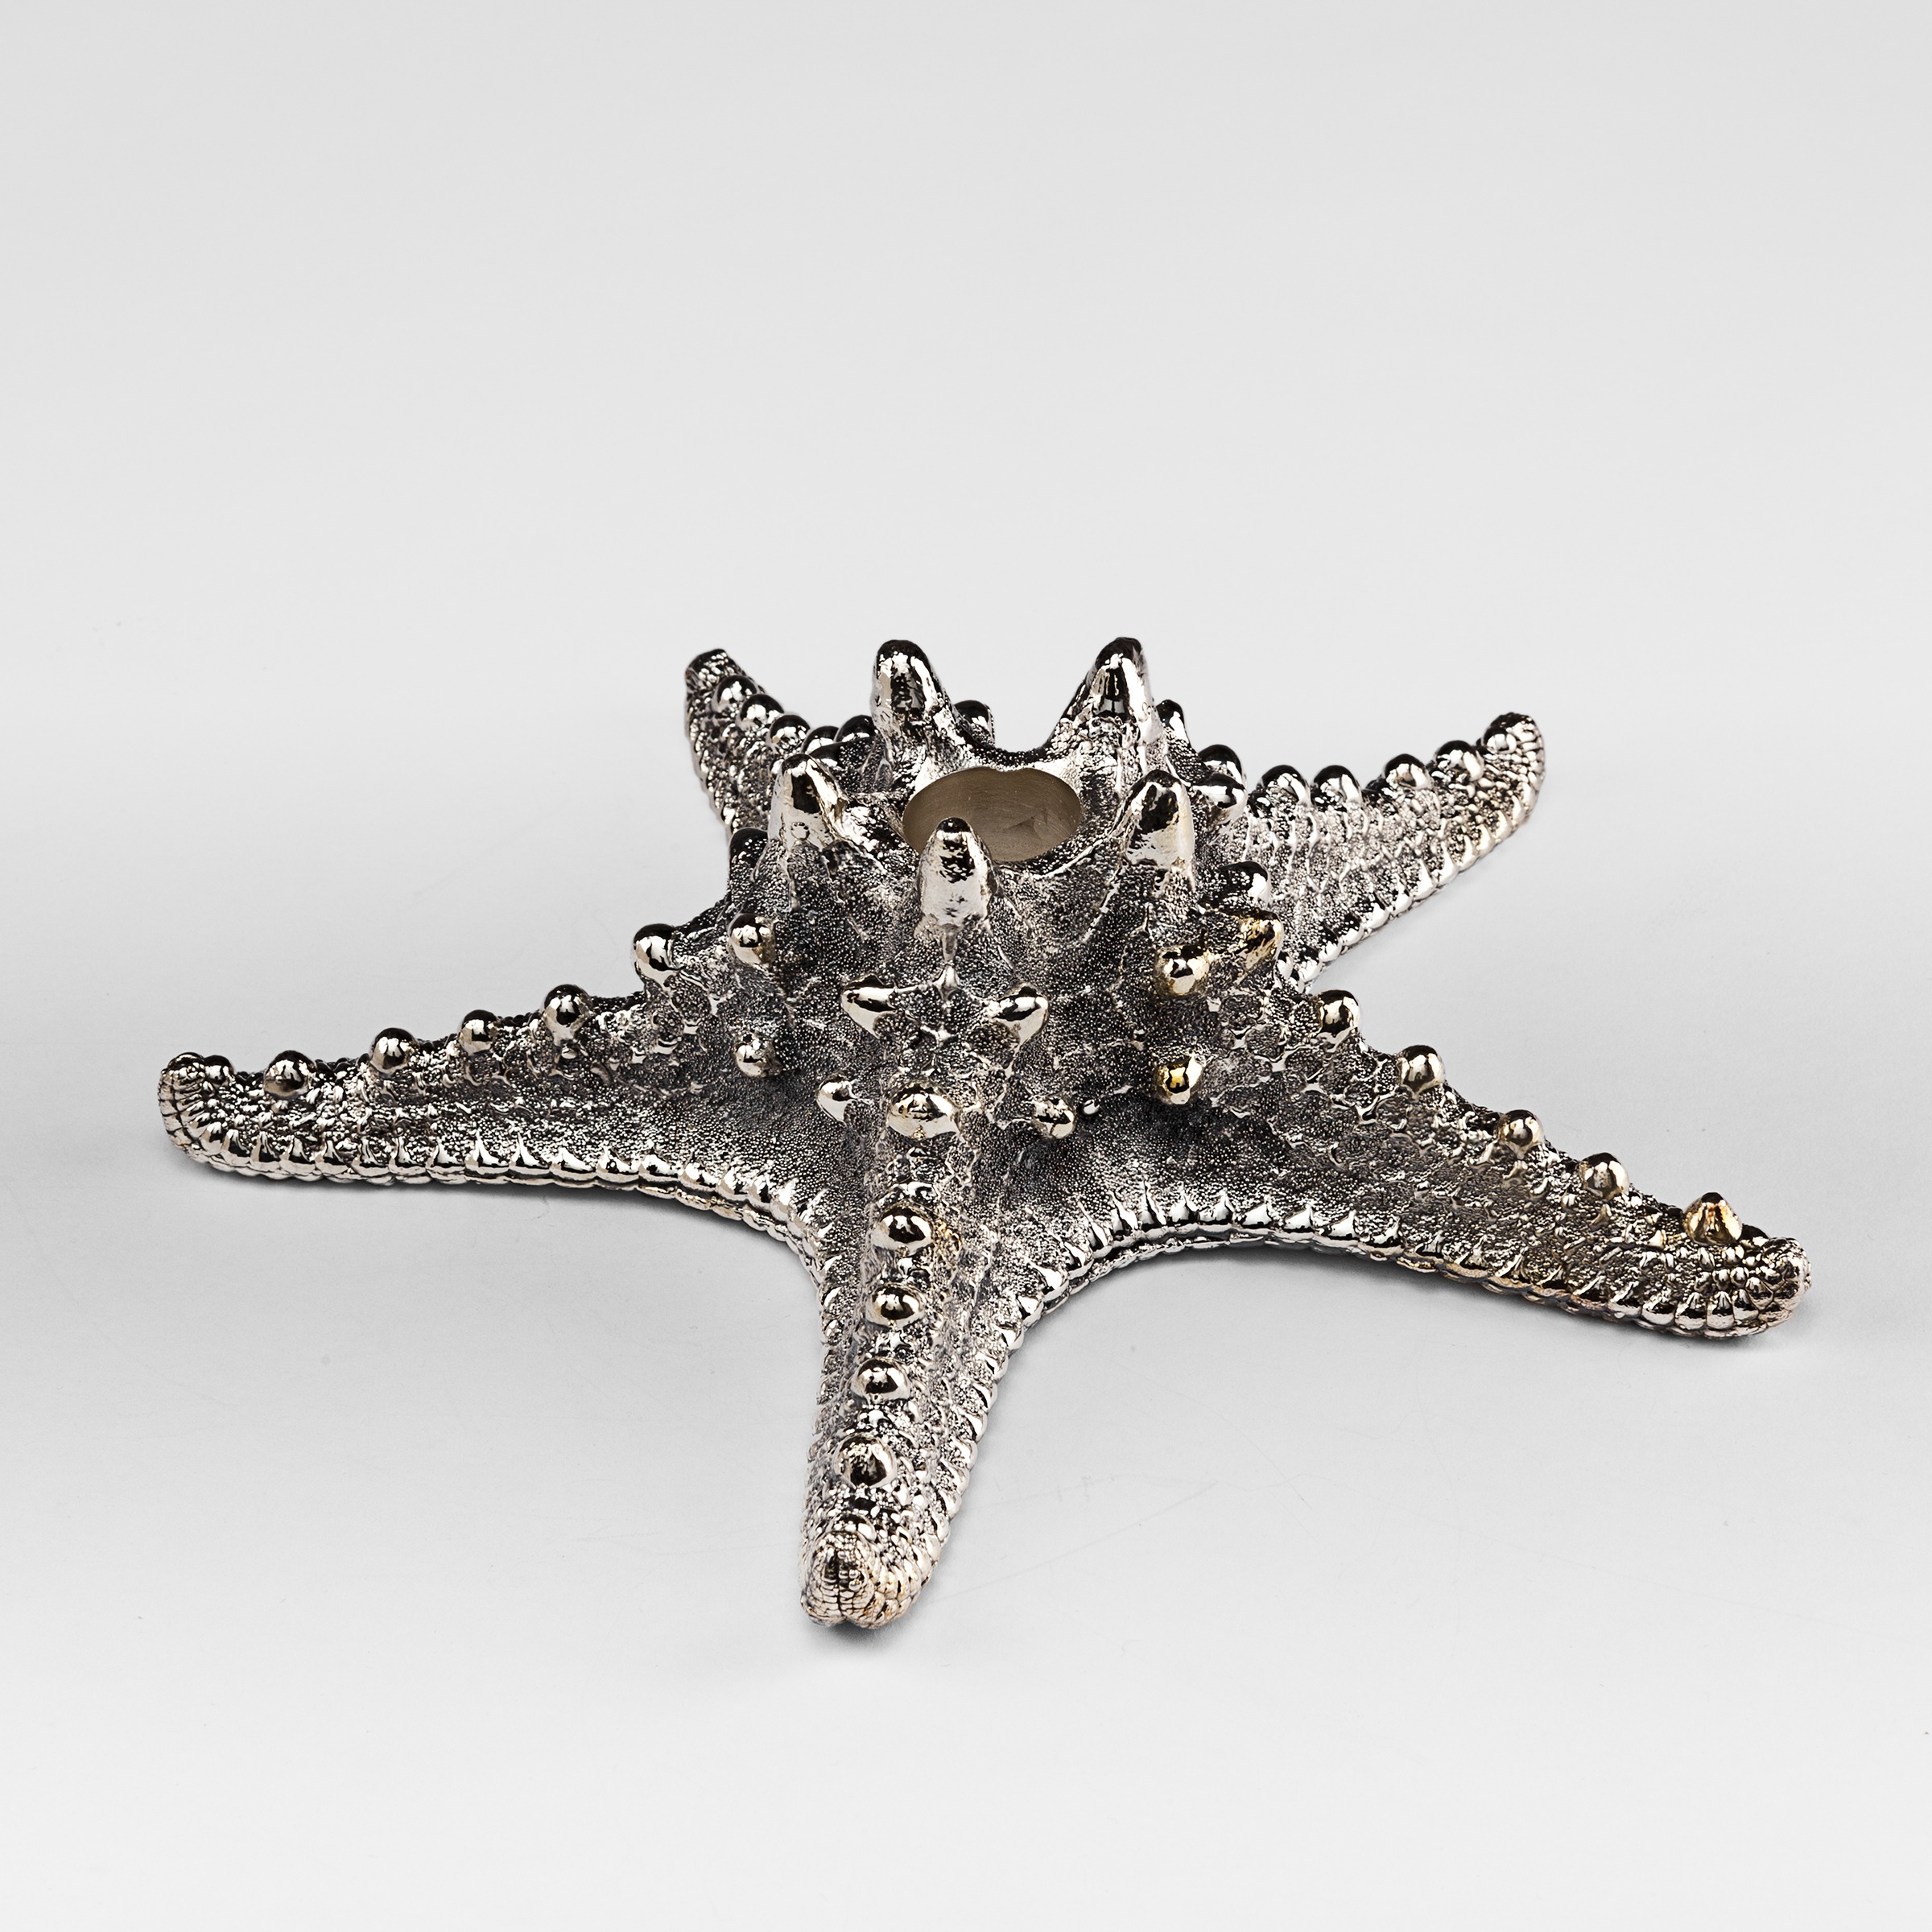 Silver Plated Star Fish